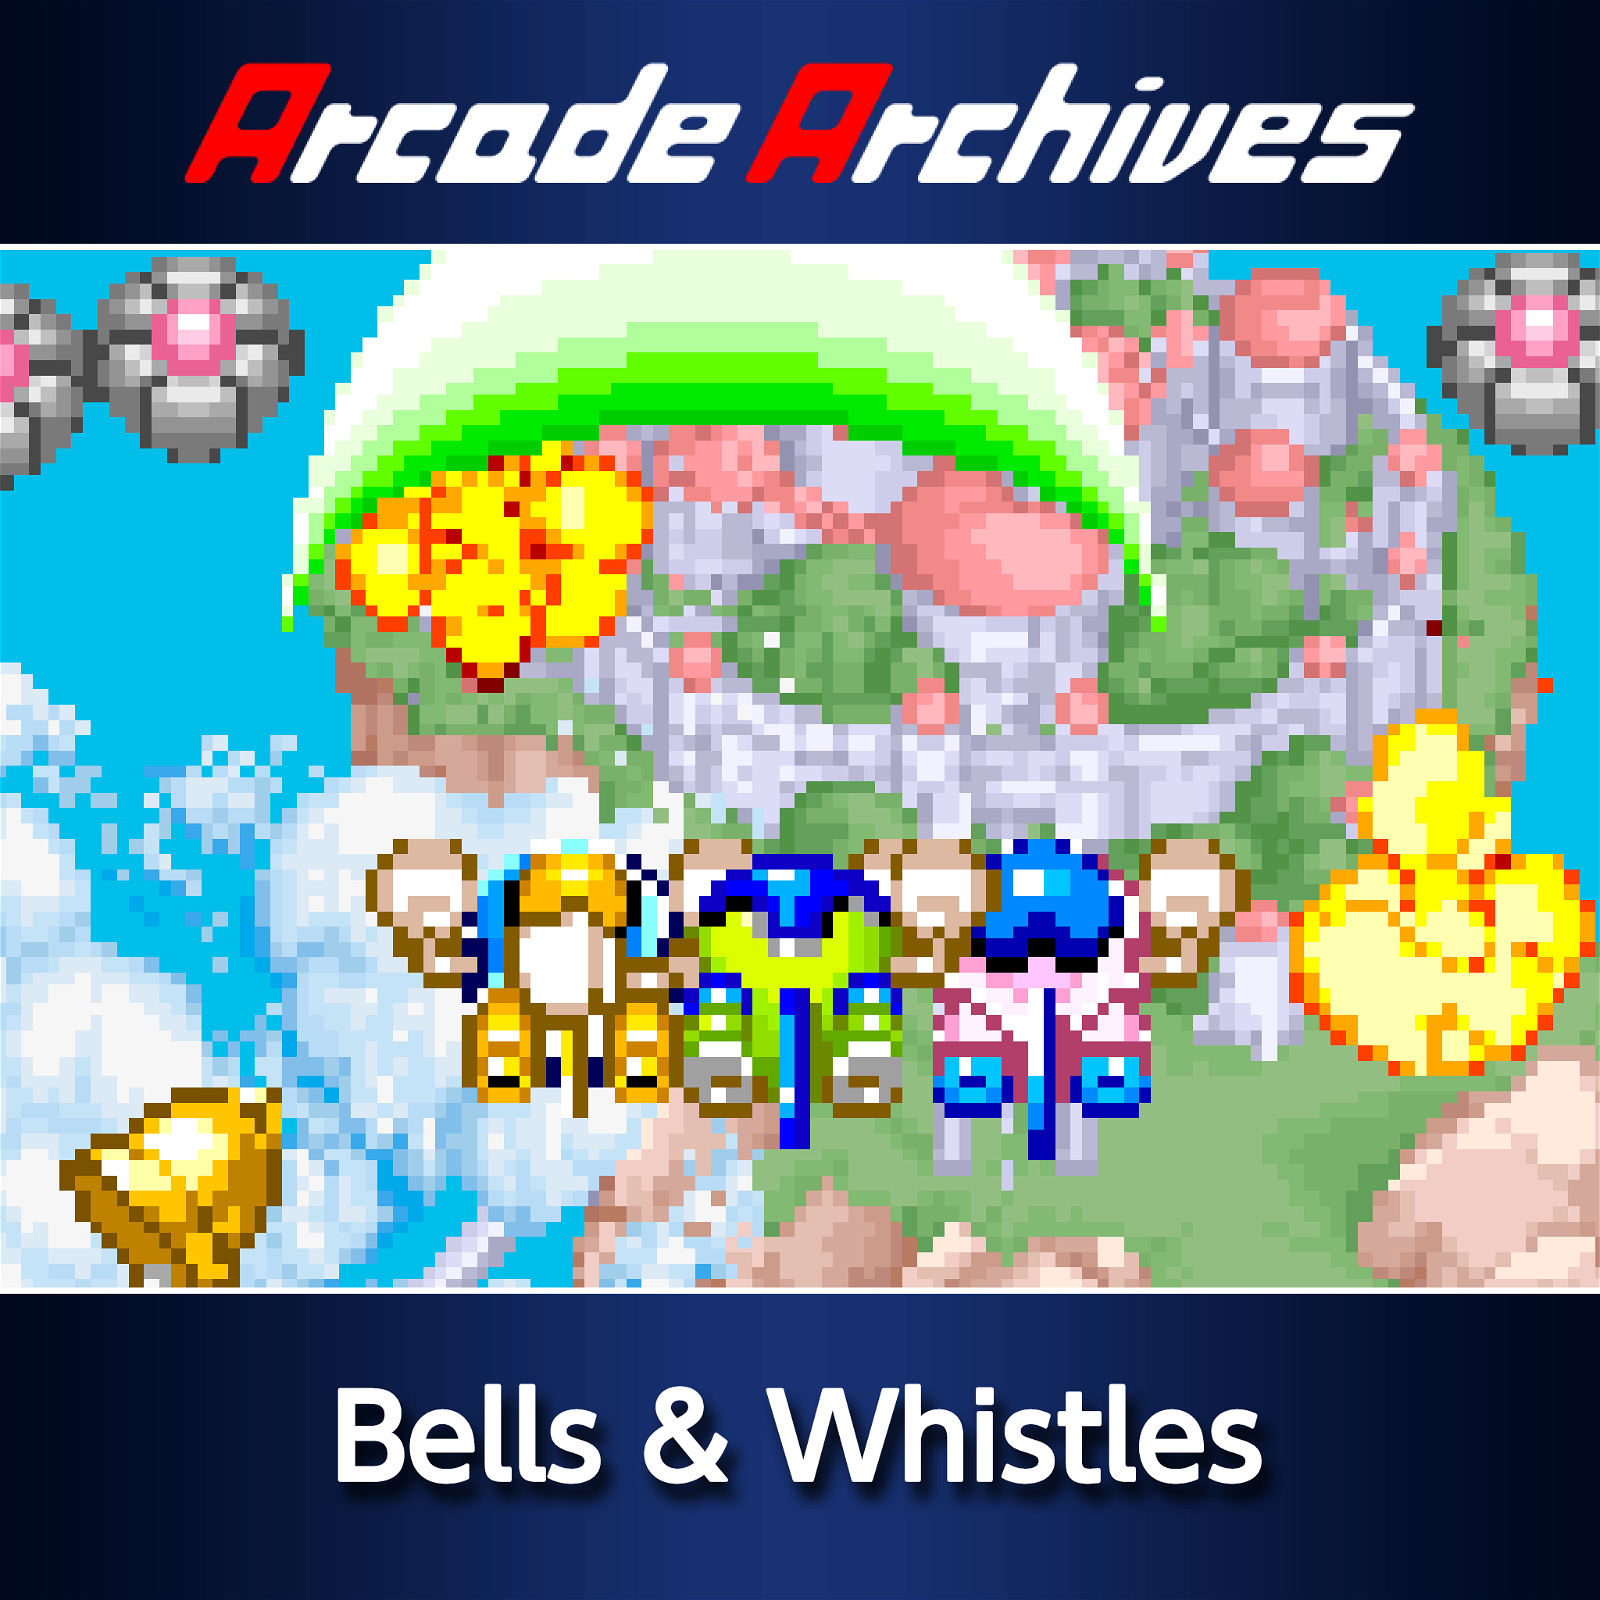 Image of Arcade Archives Bells & Whistles